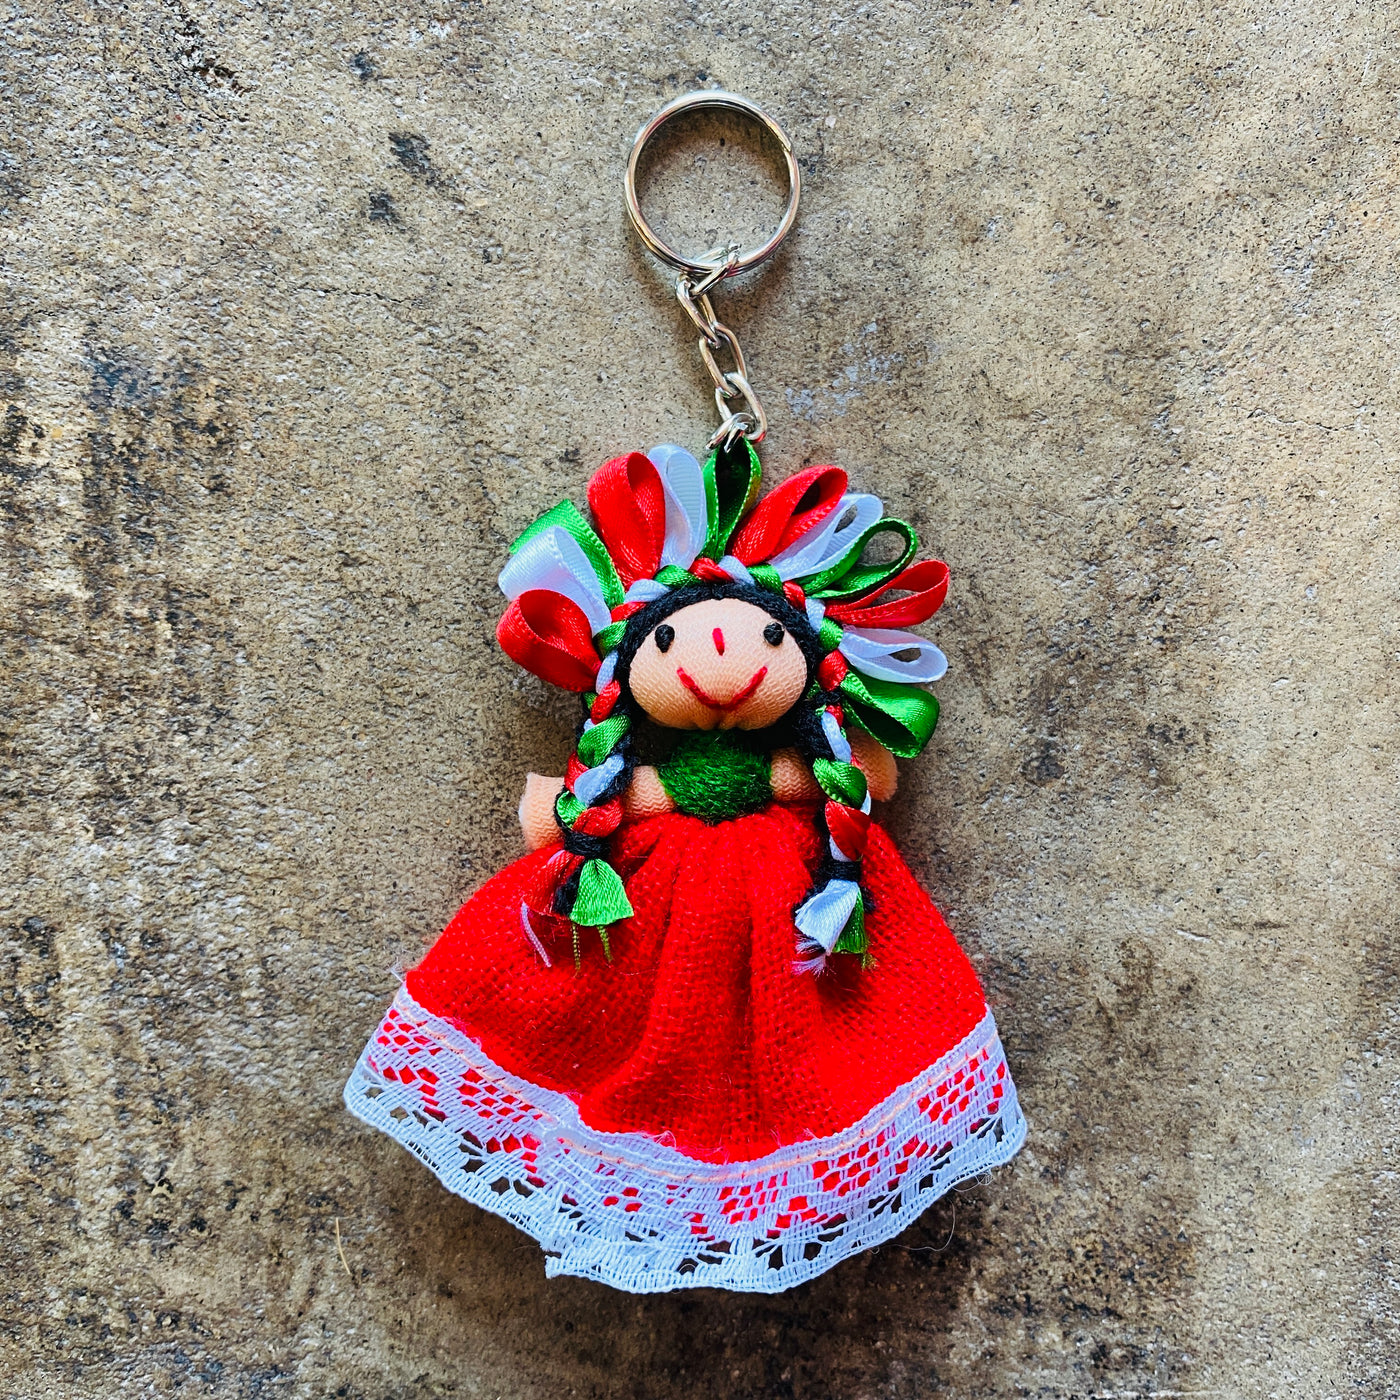 Small Mexican woven rag doll in red, white and green colors on a keychain.